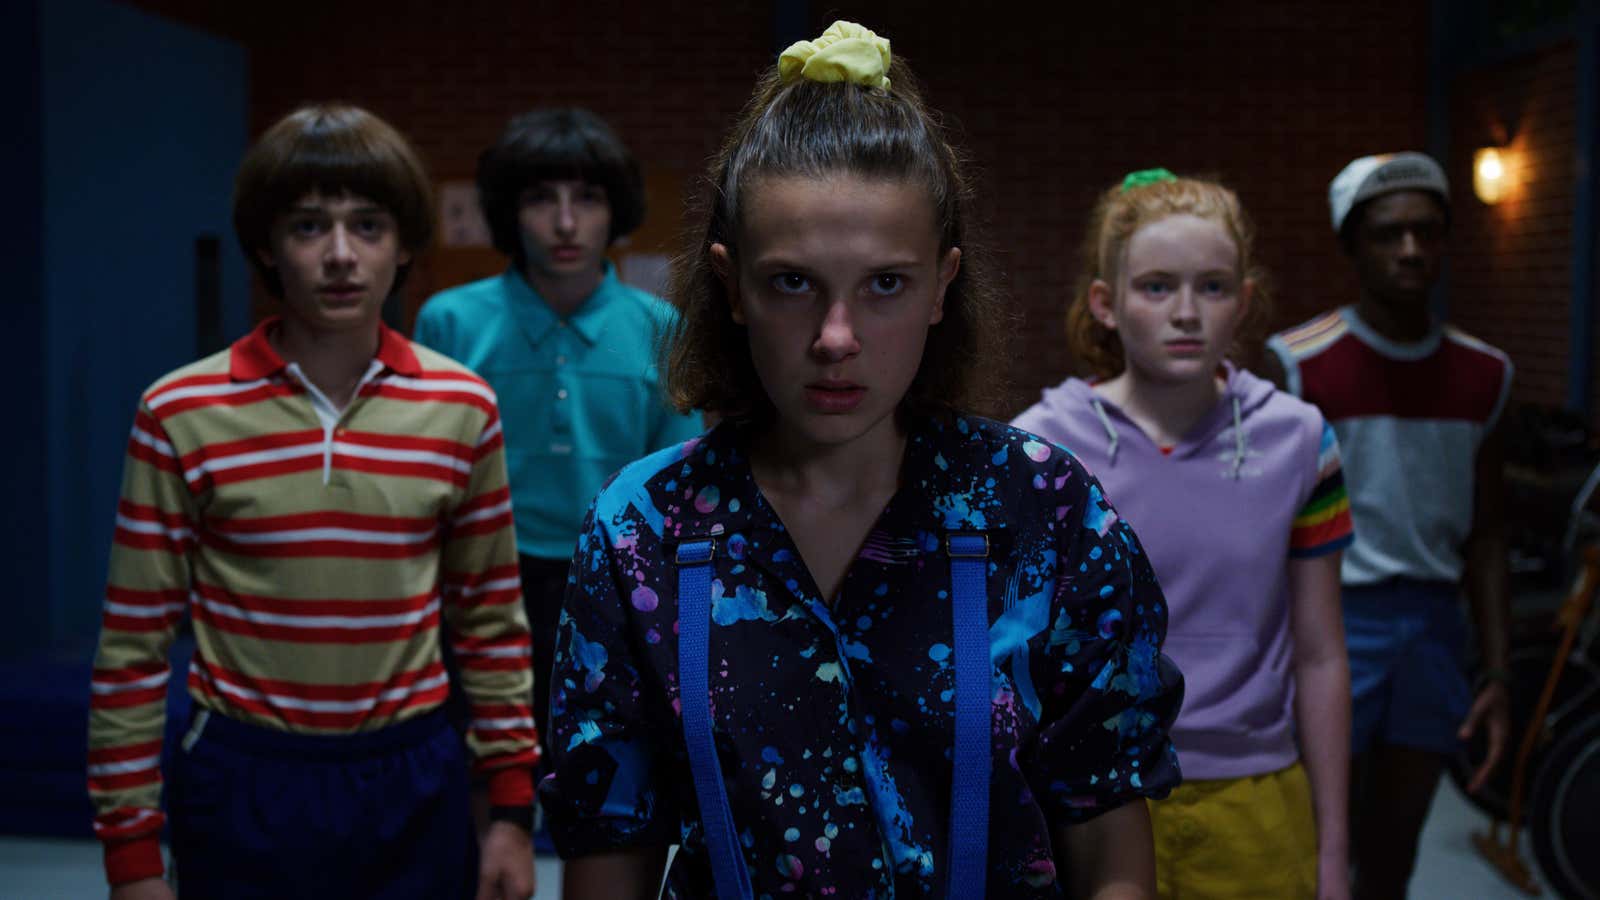 Pin by eny on more and more  Eleven stranger things, Stranger